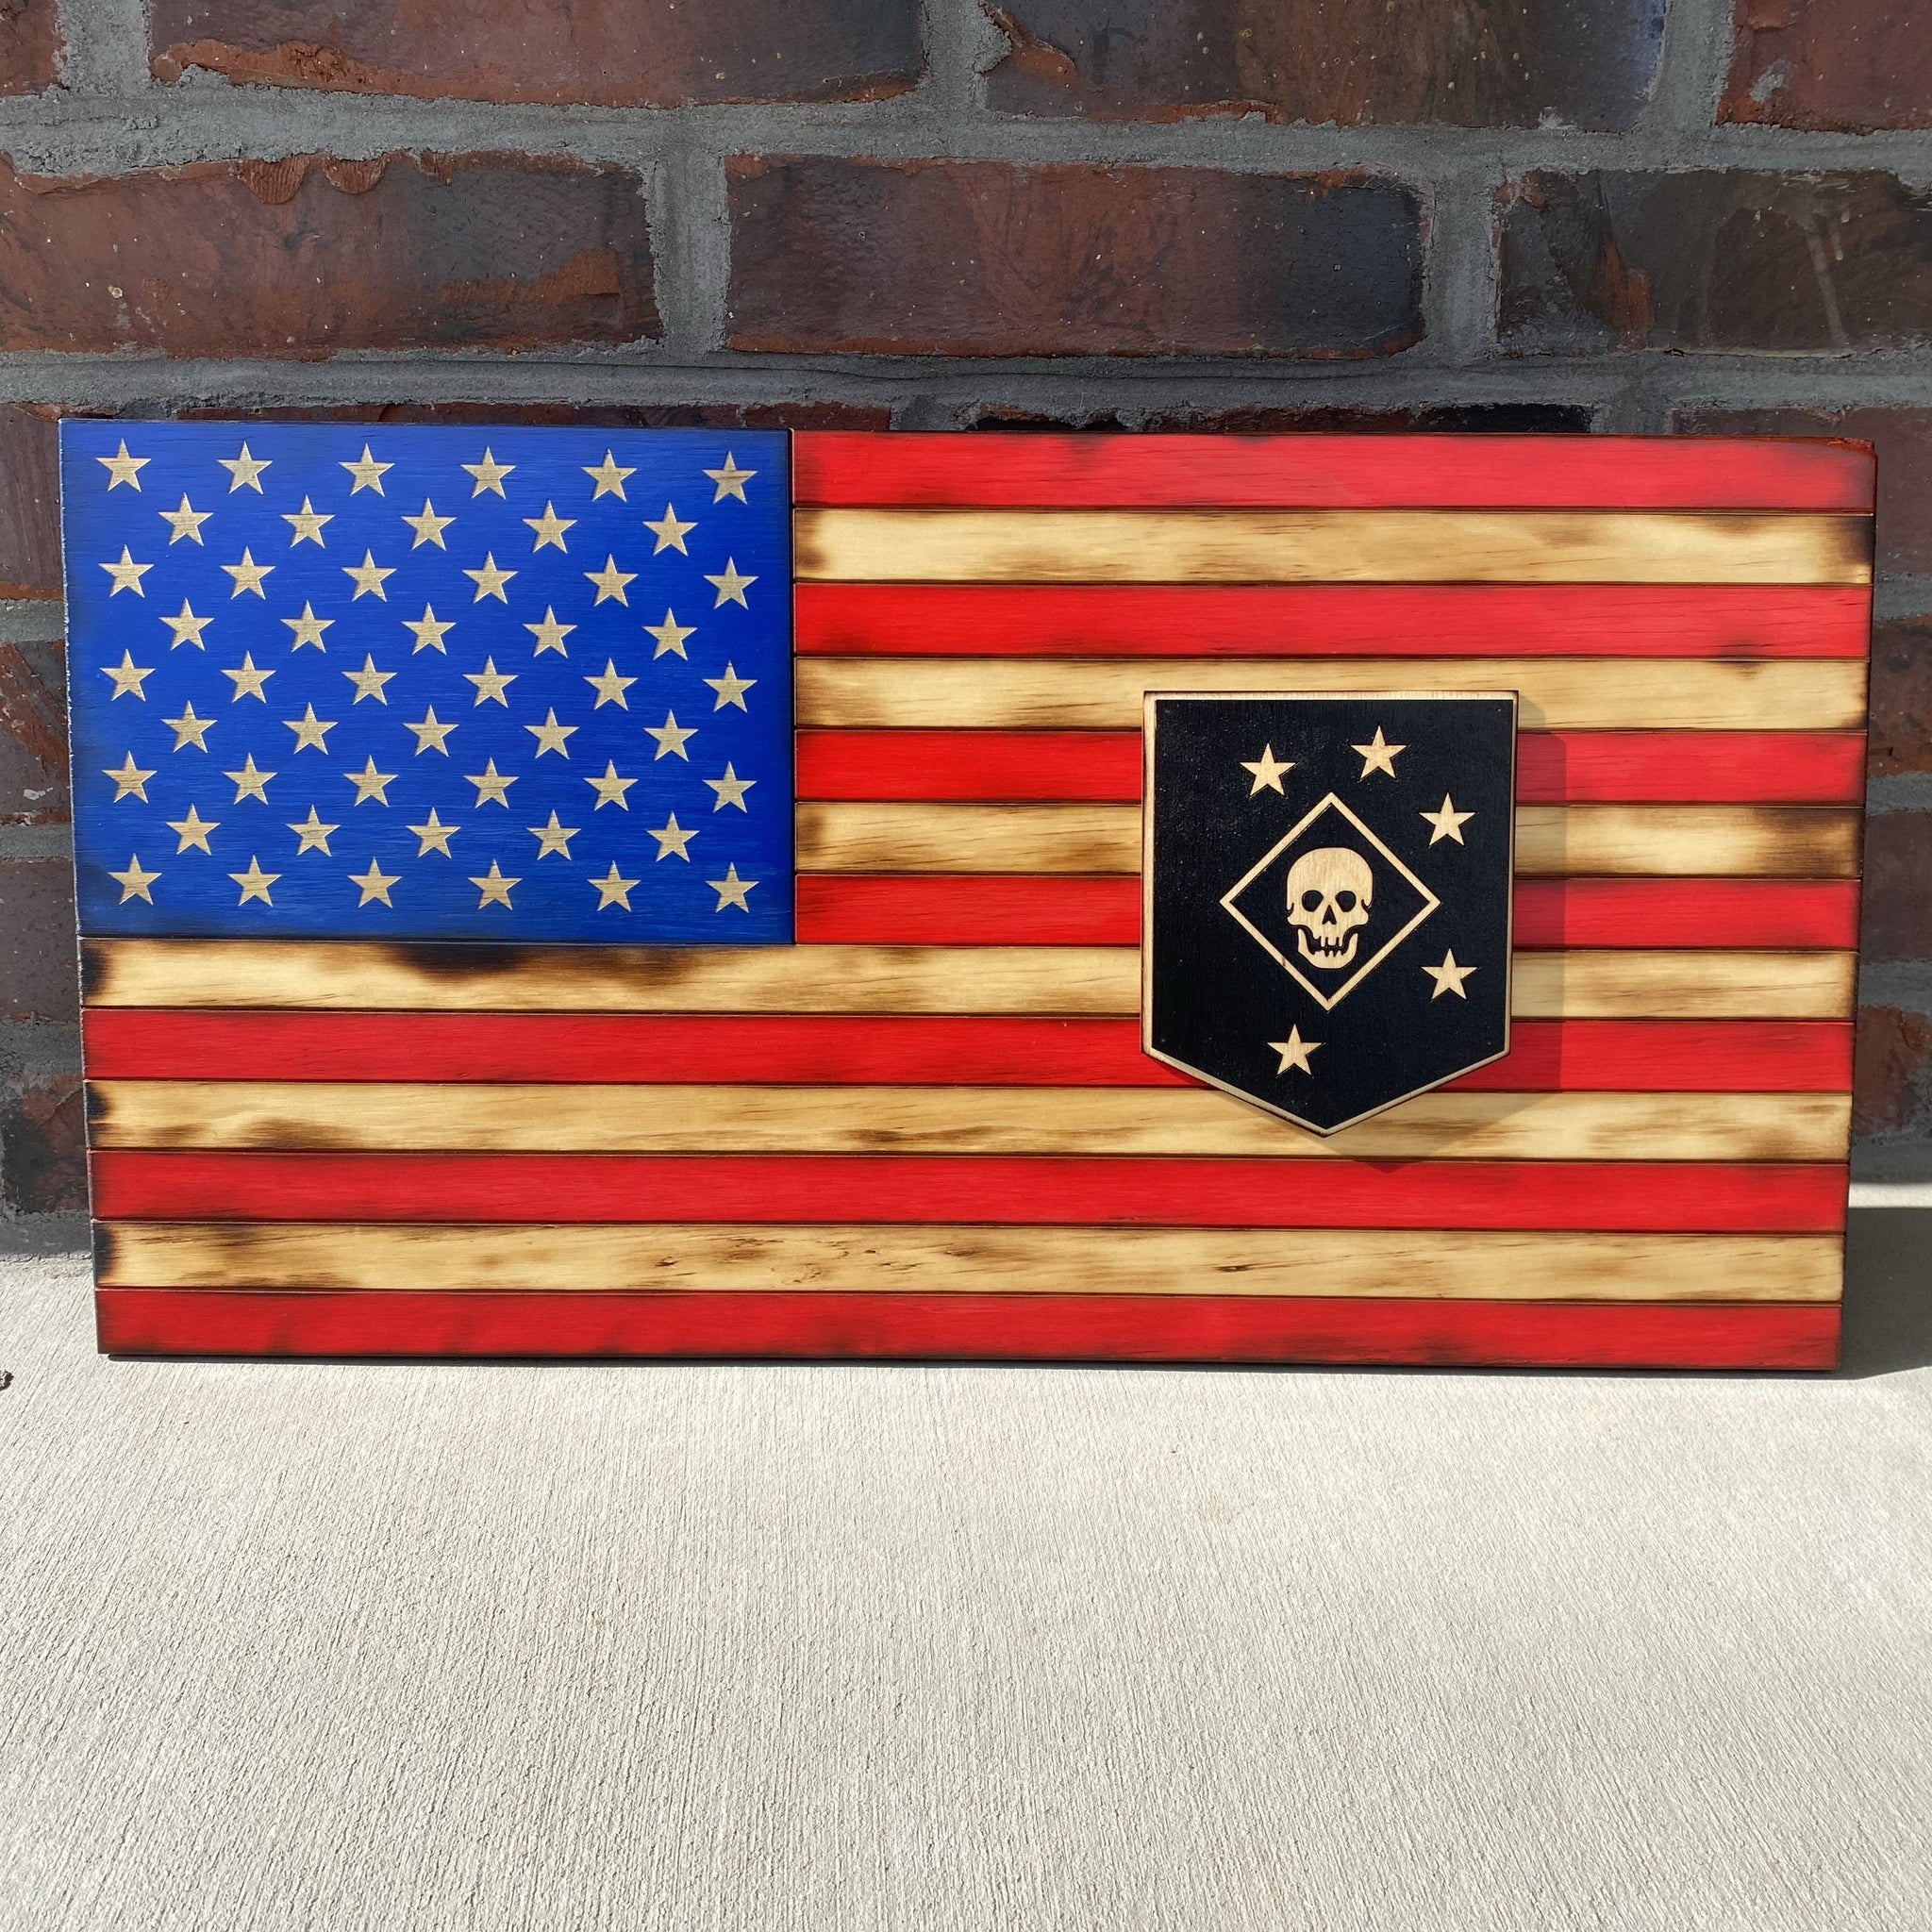 twenty four inch red white and blue american flag with laser cut marine raiders patch, laser engraving, and laser cut stars